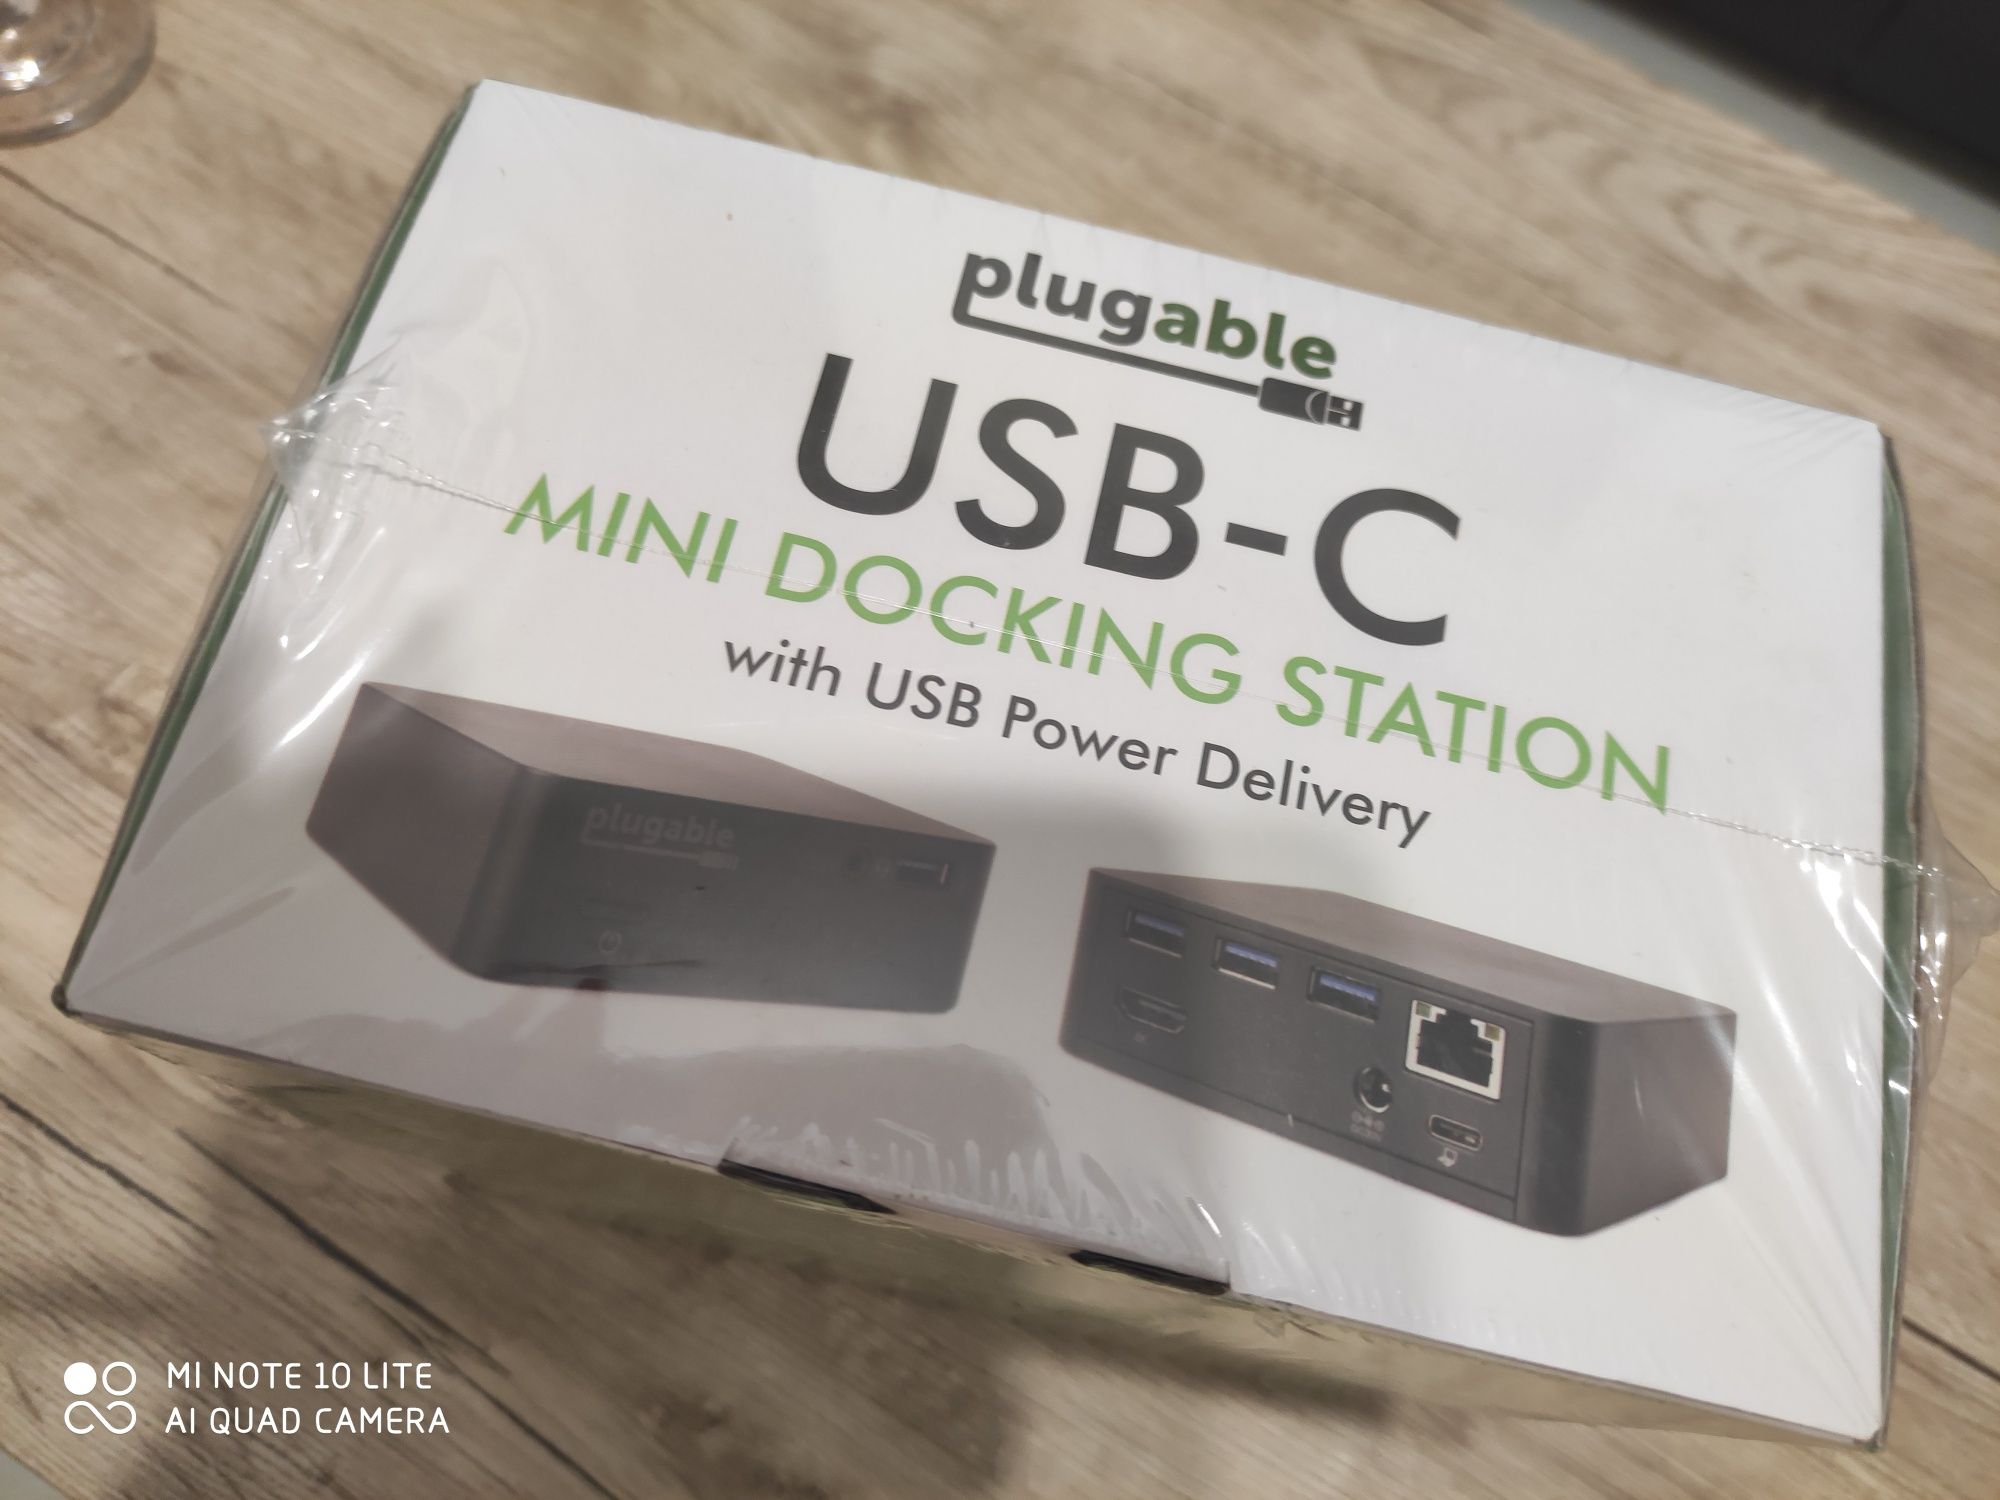 Plugable Mini docking station with USB power delivery